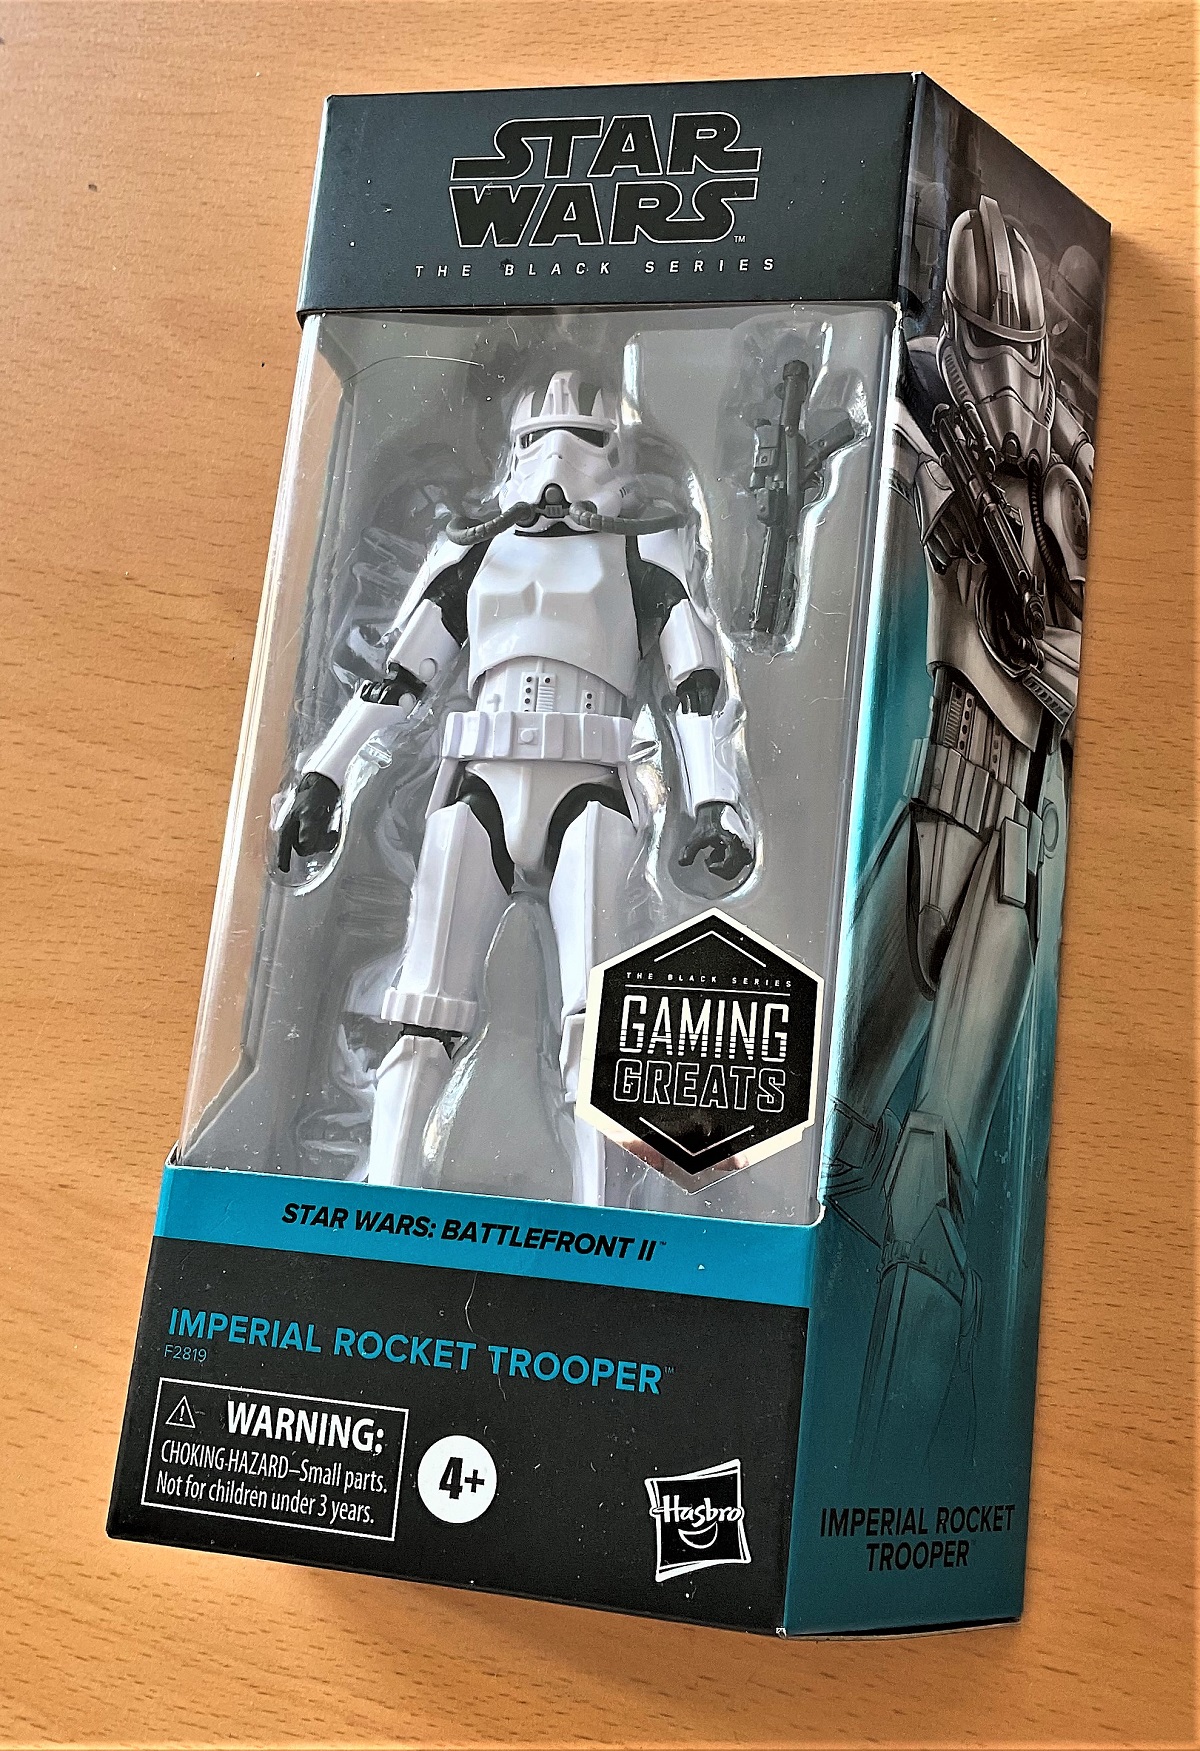 Star Wars, The Black Series miniature action figure of Imperial Rocket Trooper, taken from Star